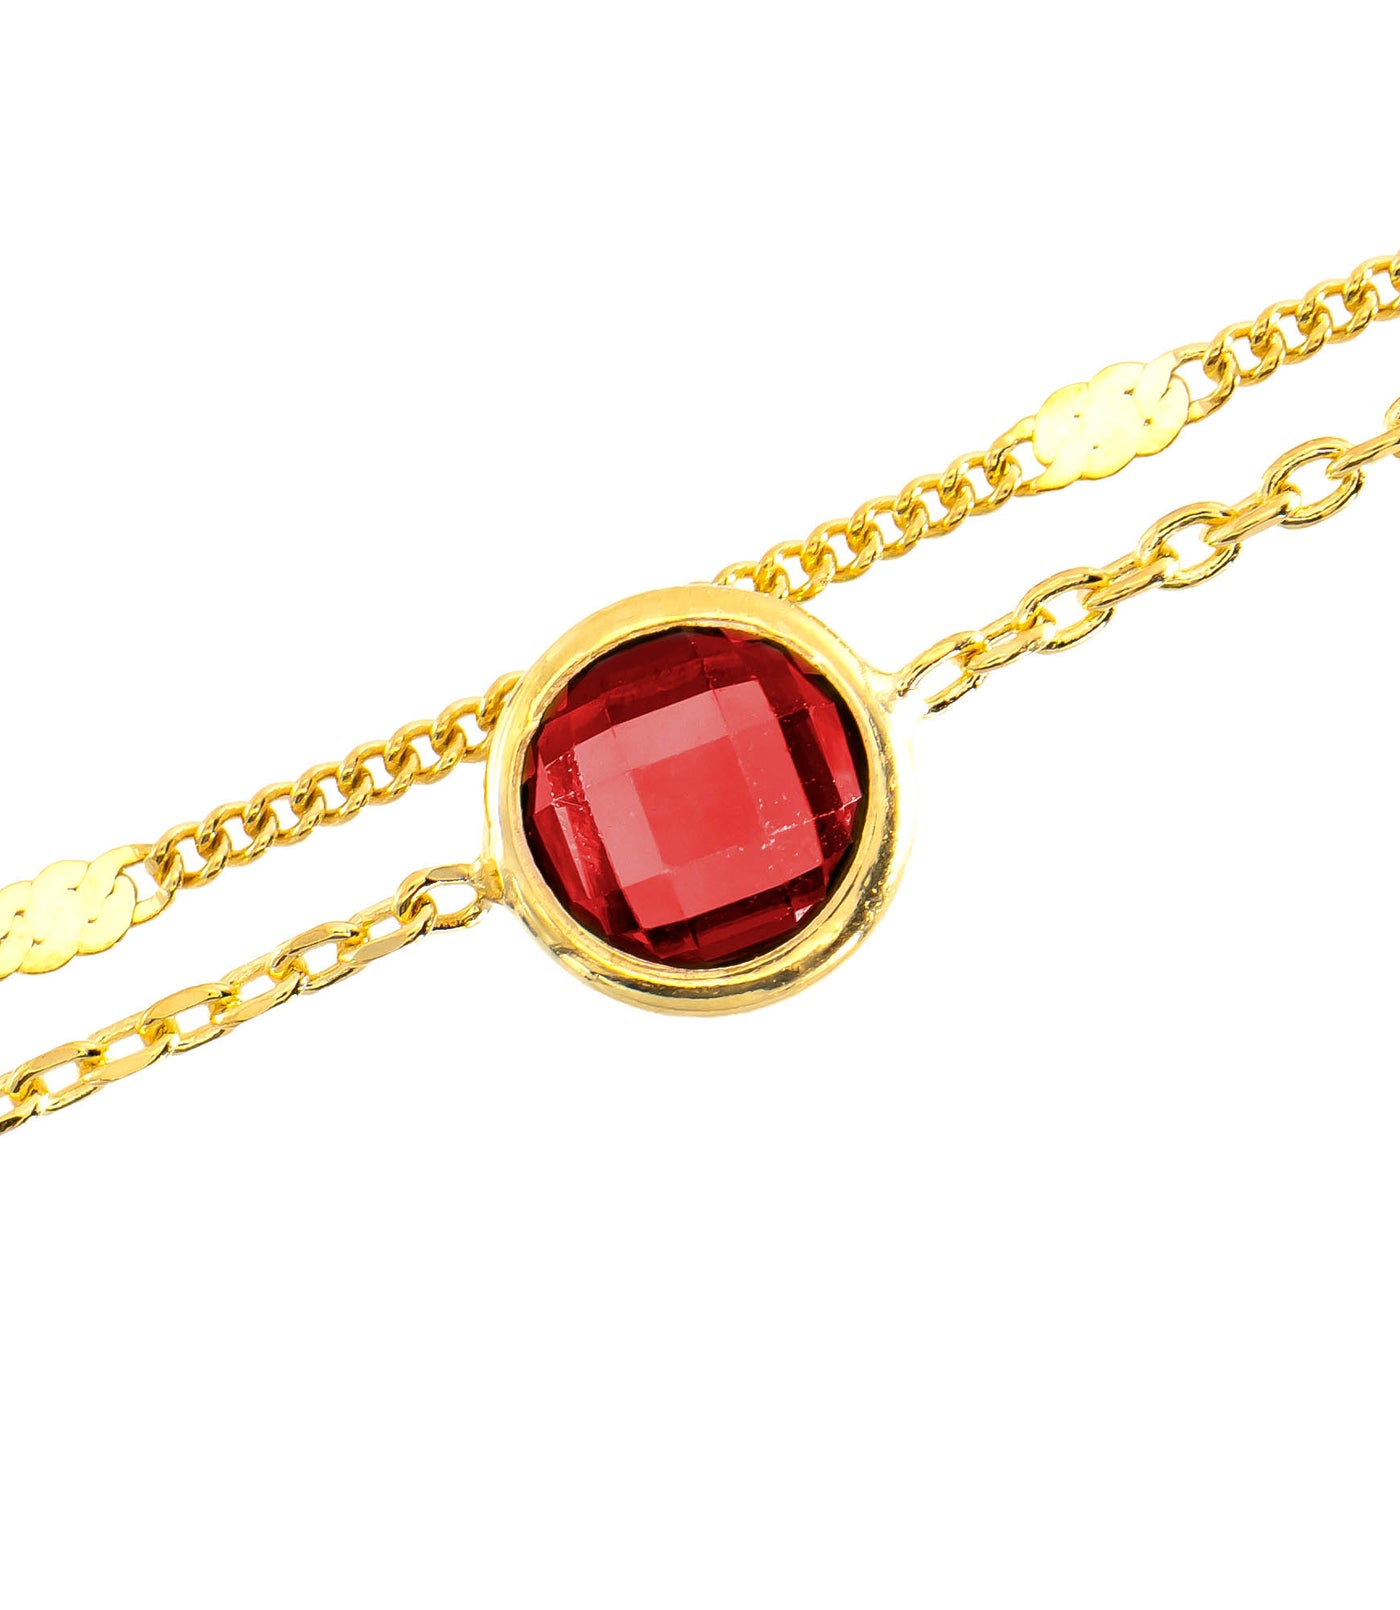 IVY | ZWEI REIHIGES ARMBAND | GOLD- ROT